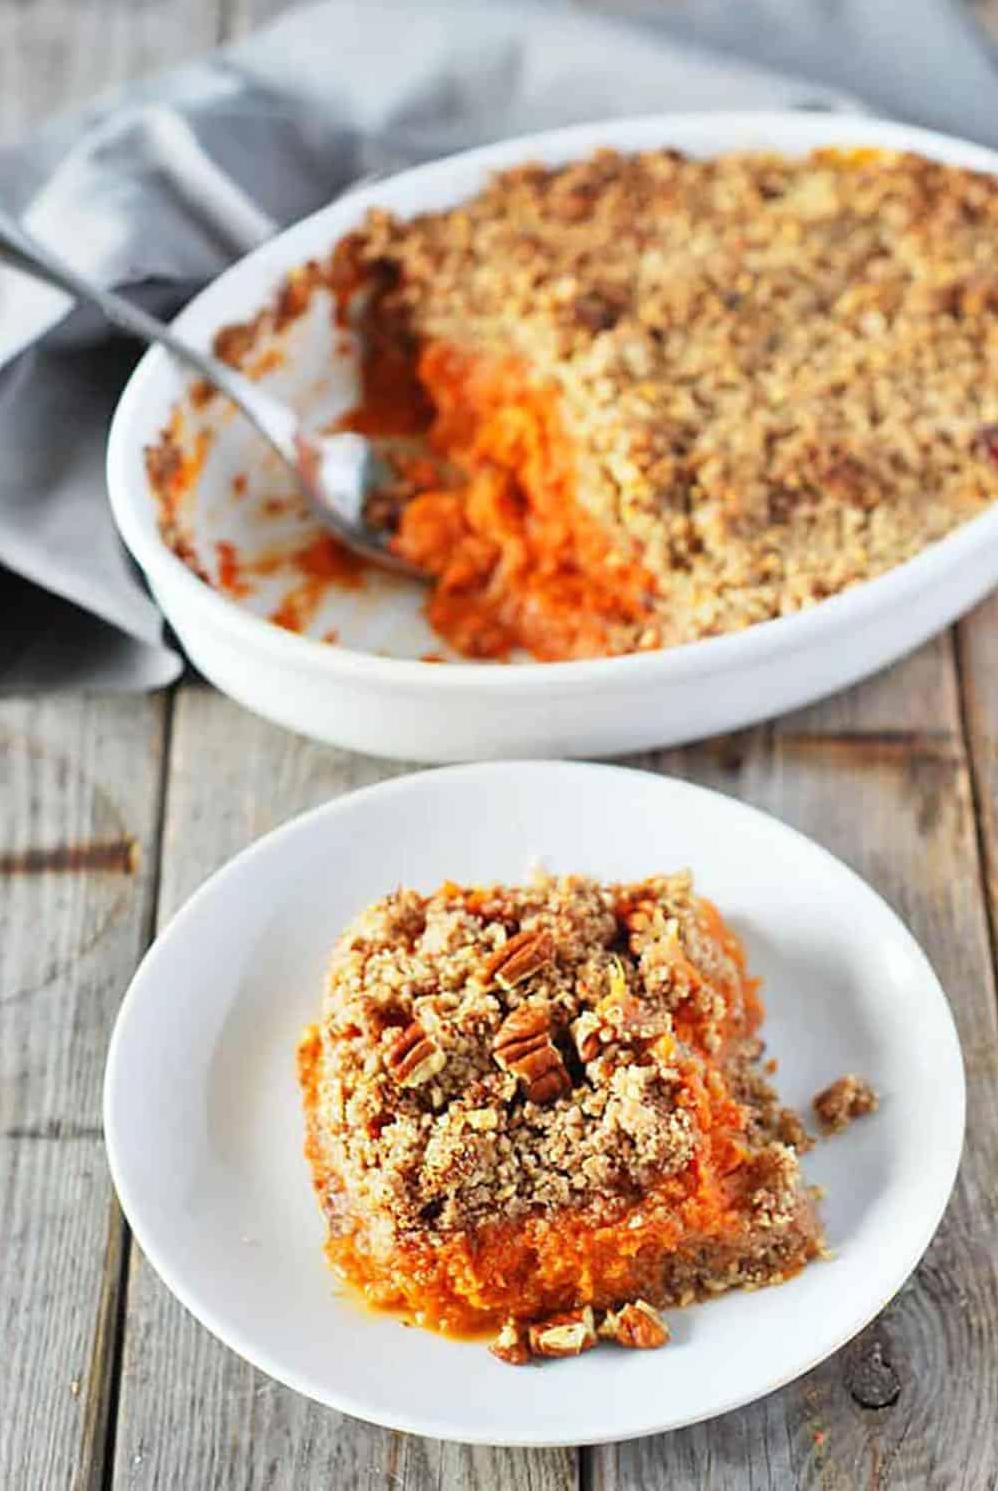  Dessert or side dish? This vegan souffle is both!